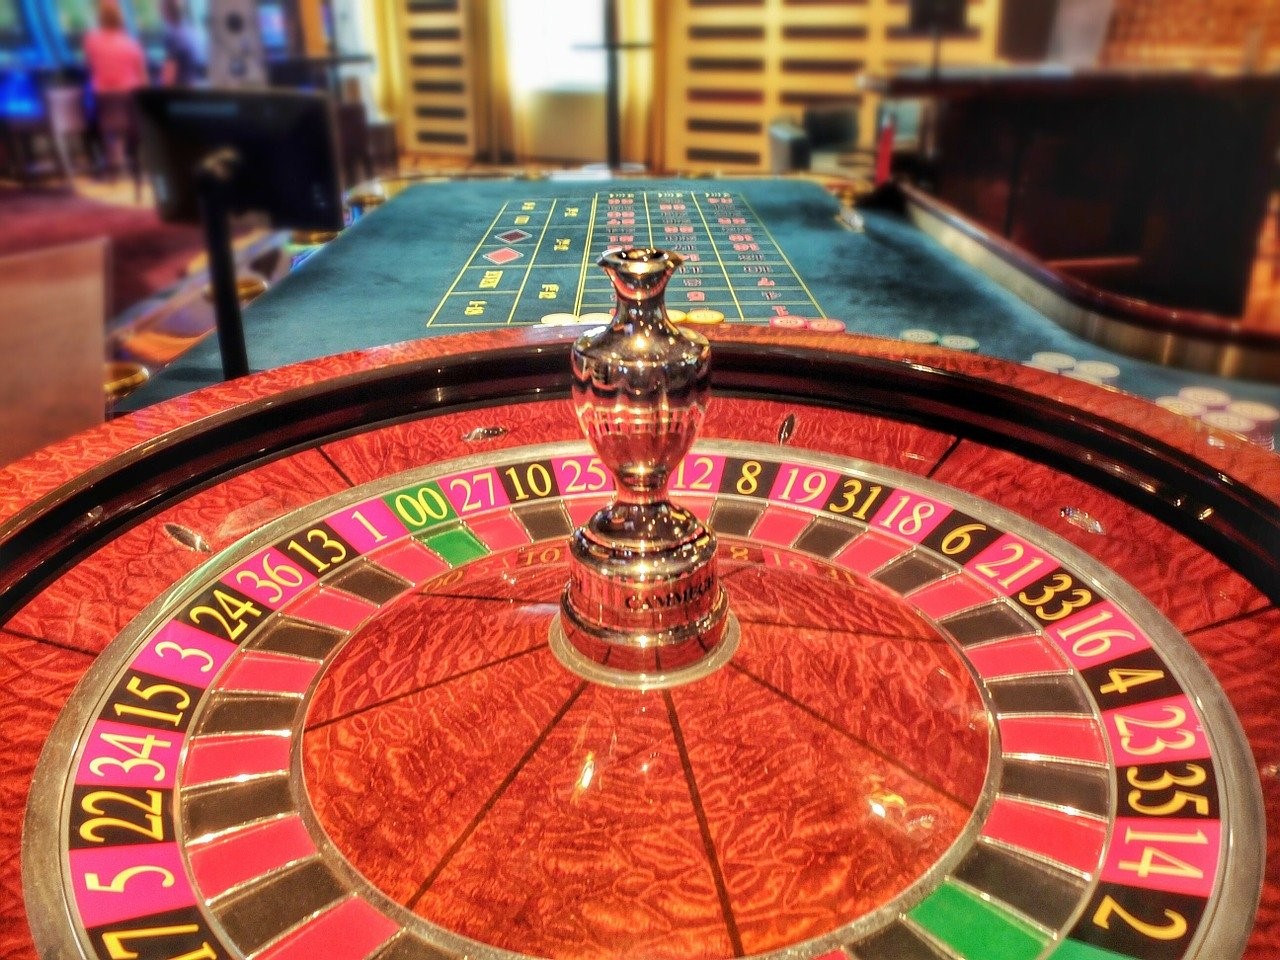 Cover image for  article: A Game of High Stakes: Media Roulette and Other Learnings from CES